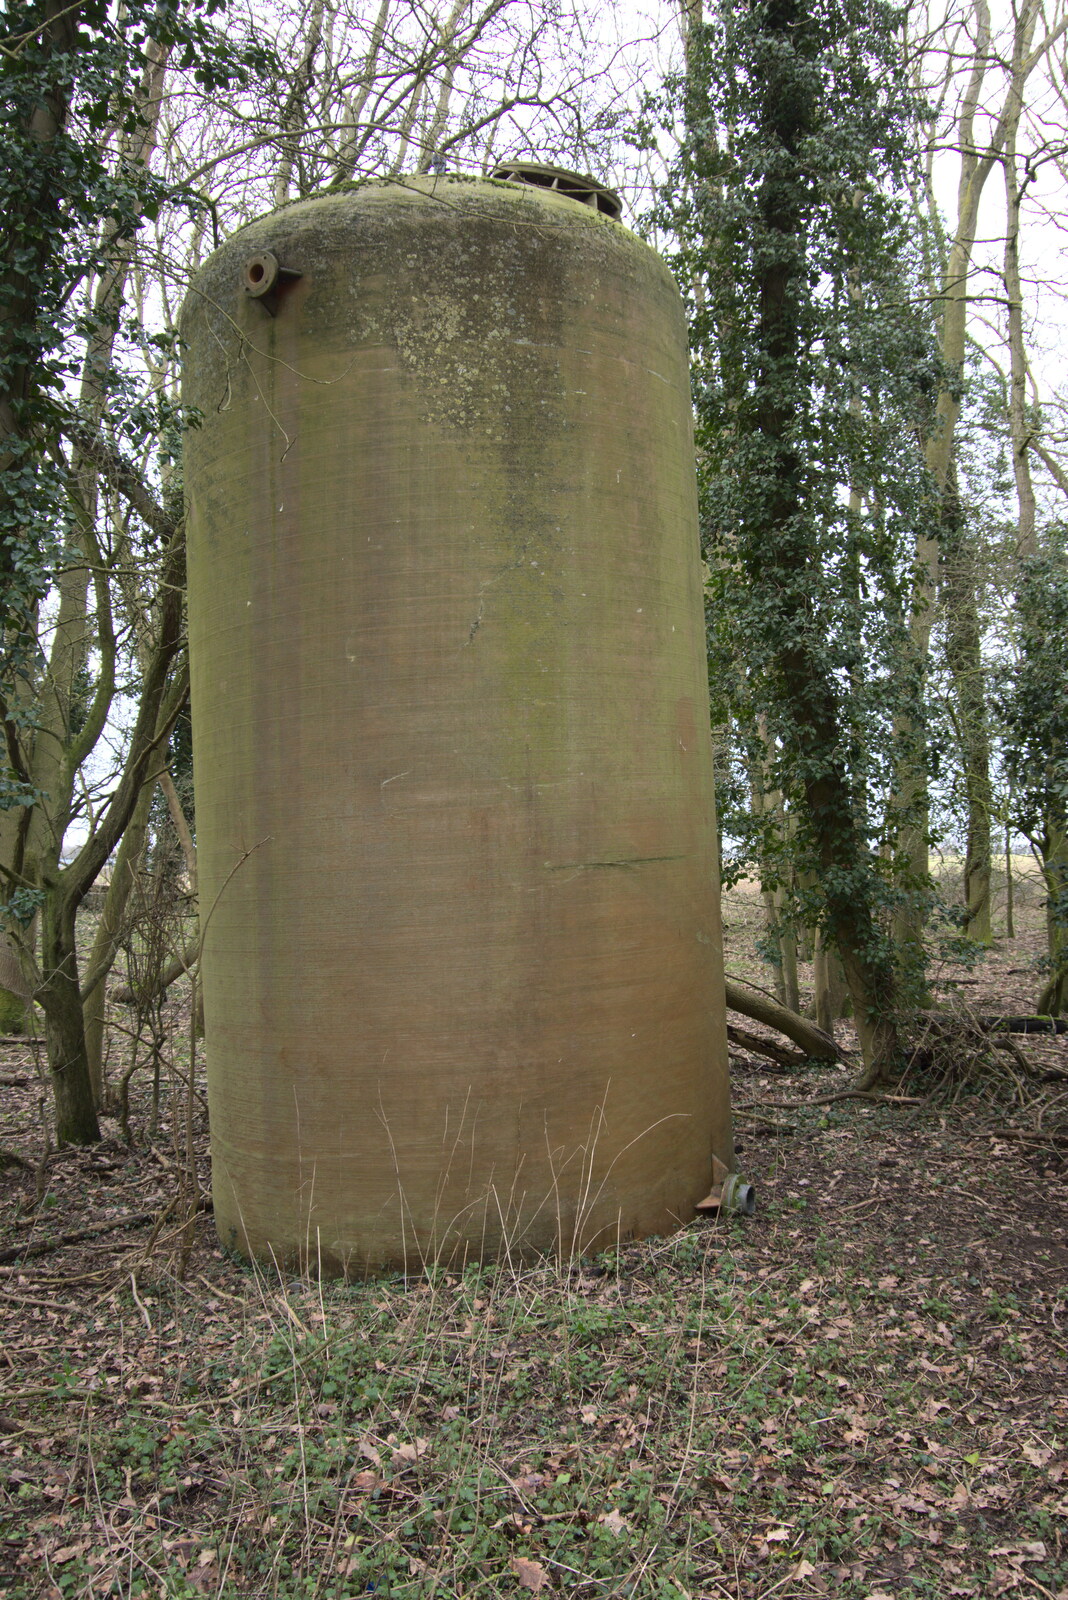 A discarded tank from The Old Sewage Works, The Avenue, Brome, Suffolk - 20th February 2021